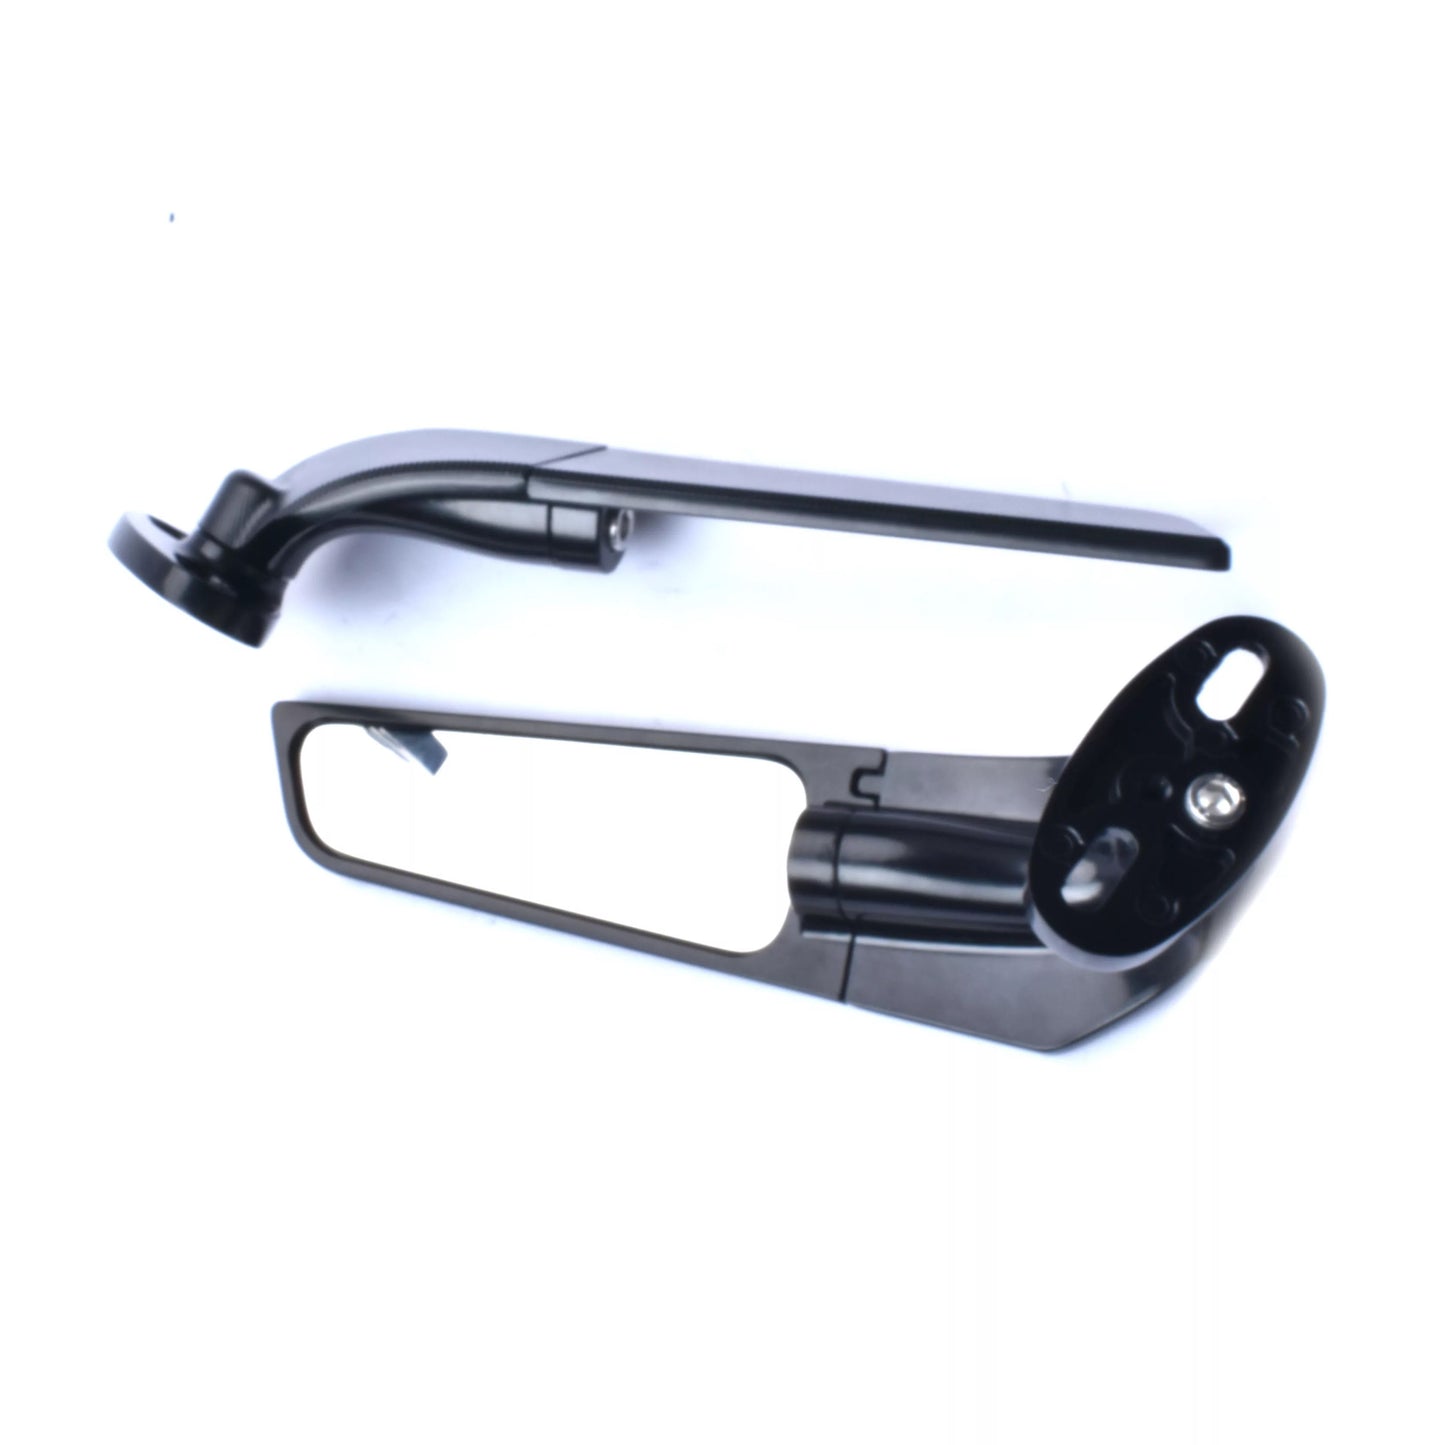 Adjustable Stealth Winglet Mirror For All Fairing Bikes